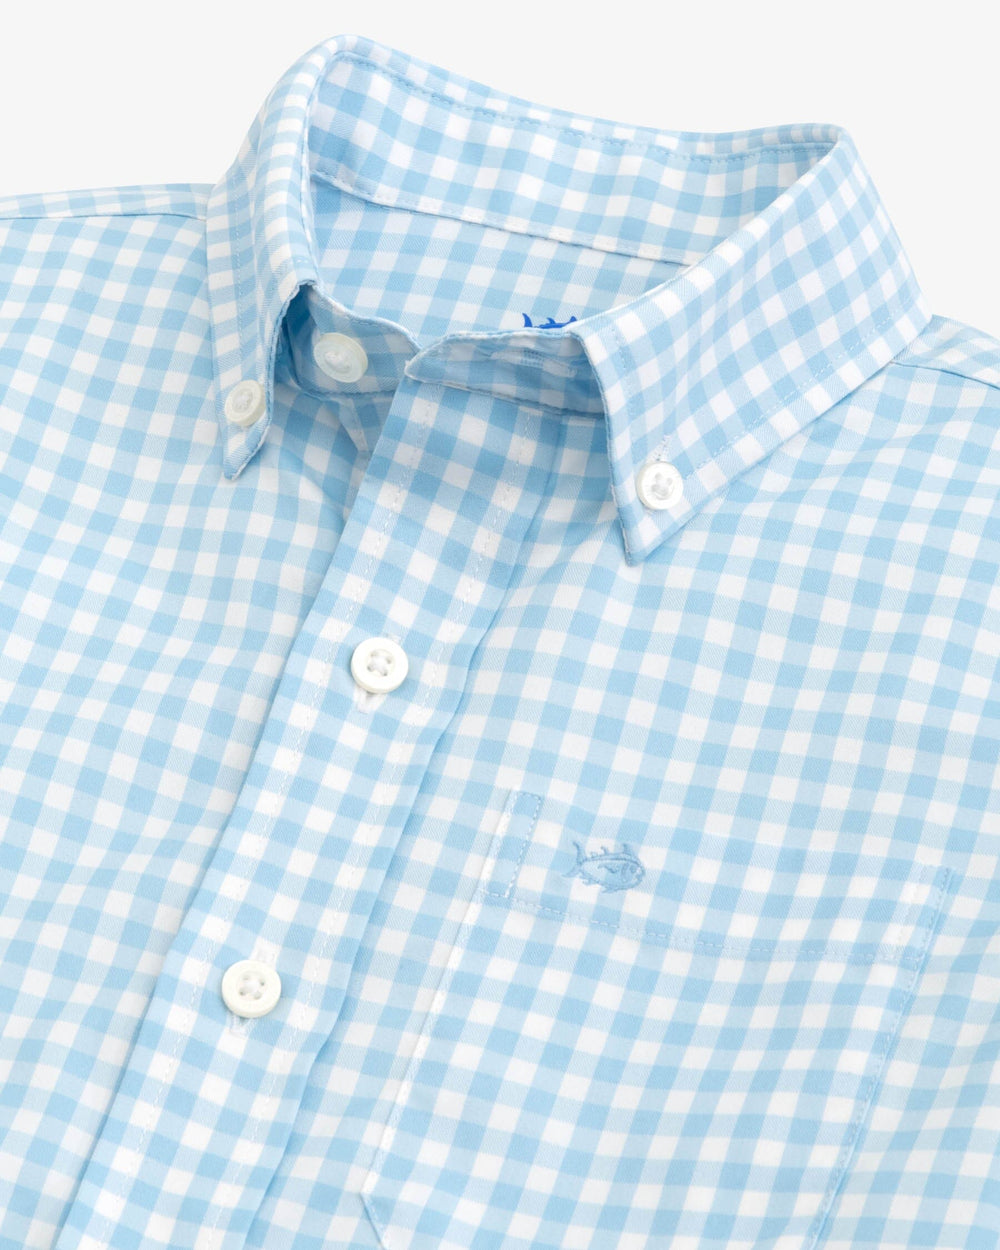 The detail view of the Southern Tide Youth Long Sleeve Hartwell Plaid Sportshirt by Southern Tide - Rain Water